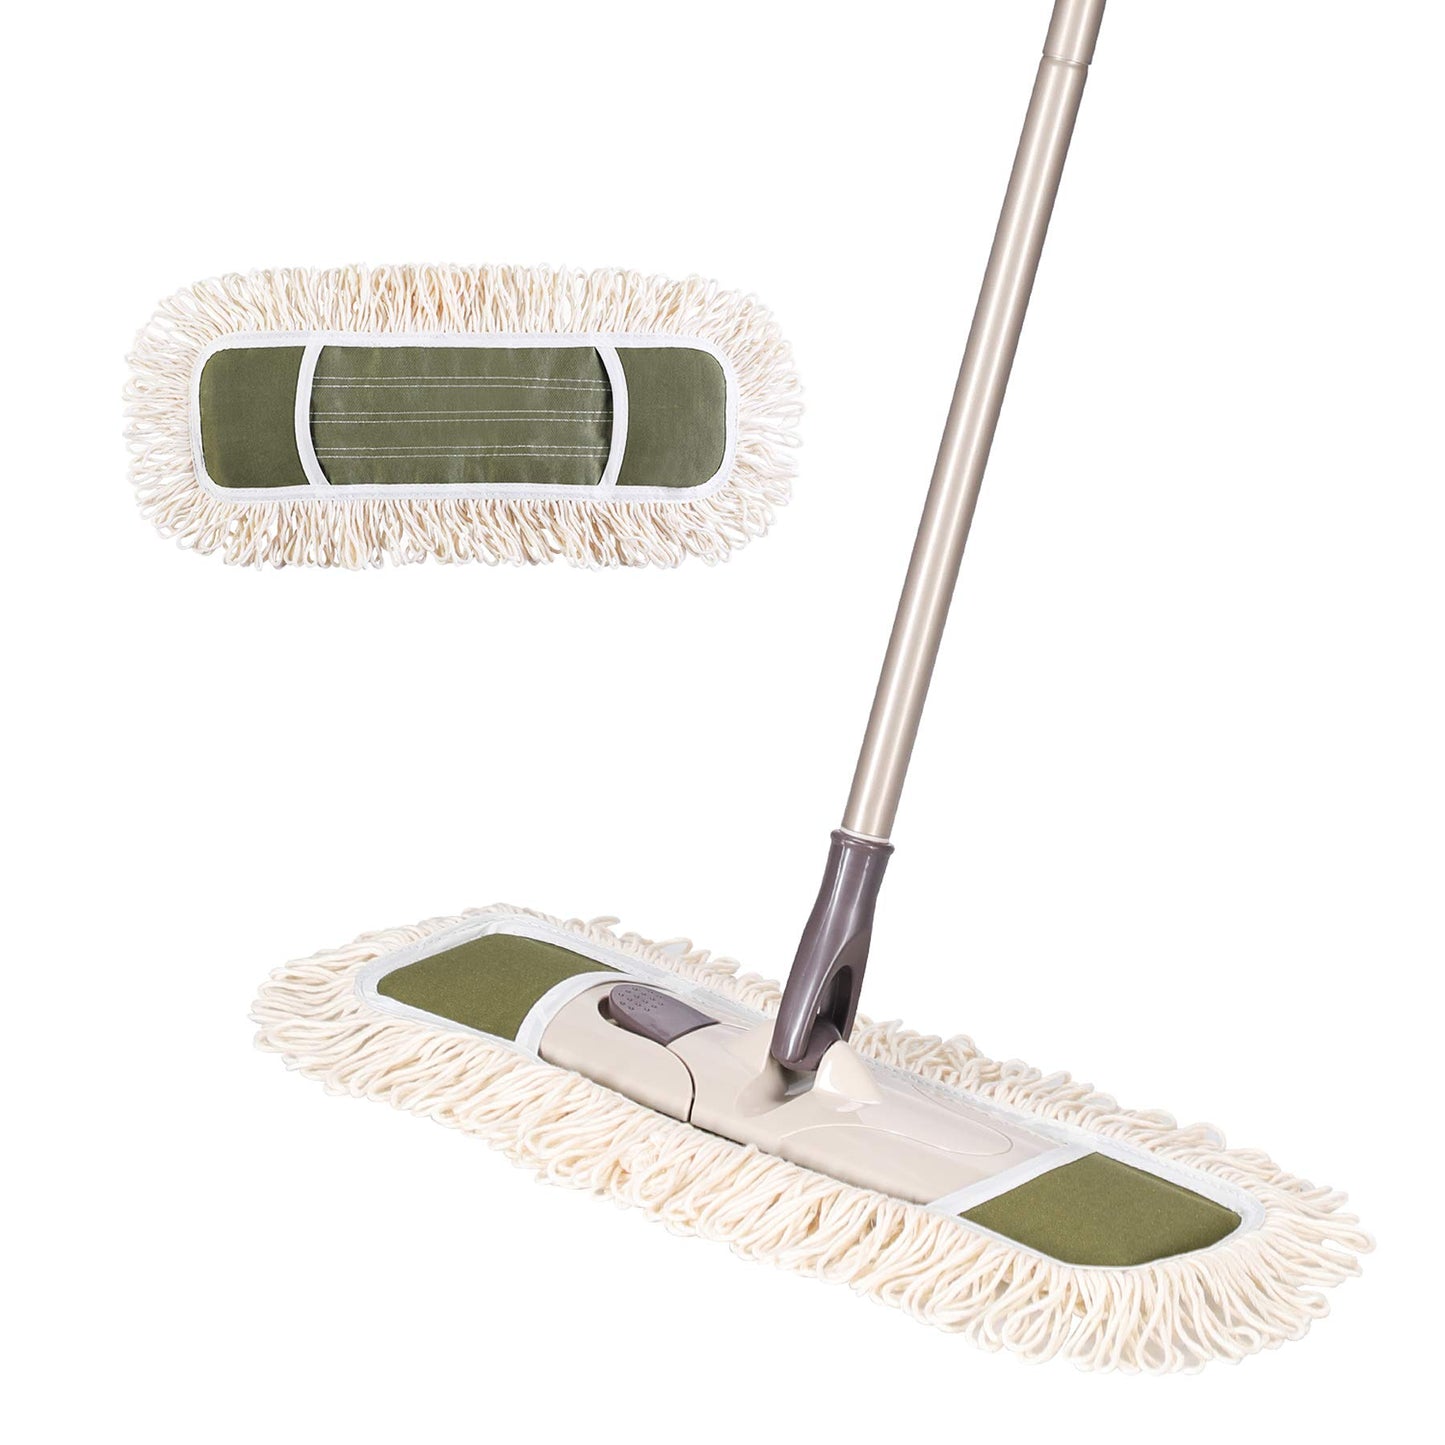 Eyliden Dust Mop, Microfiber Mops for Floor Cleaning, with Extendable Adjustable Handle and 2 Washable Mops Pads (Blue)